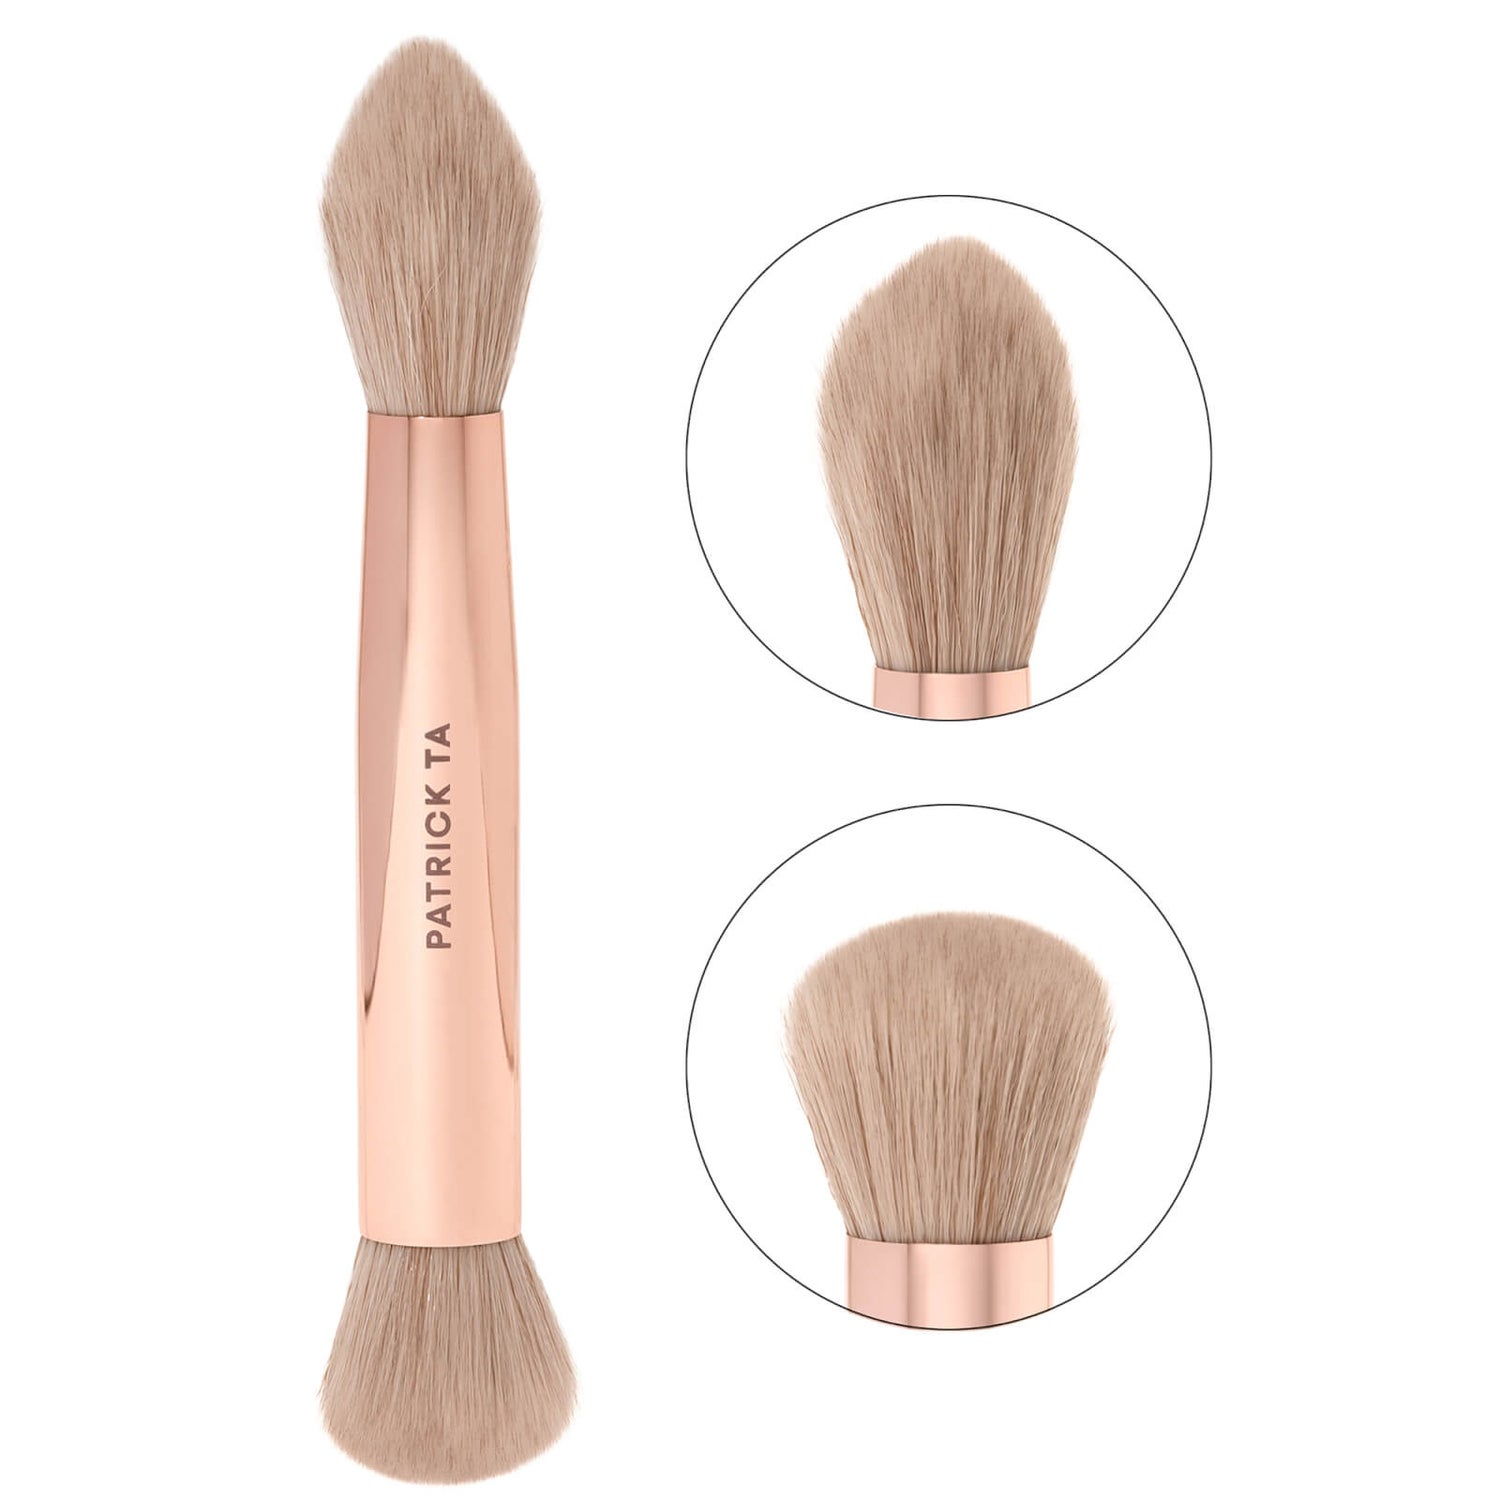 PATRICK TA Major Skin Dual-Ended Complexion Brush